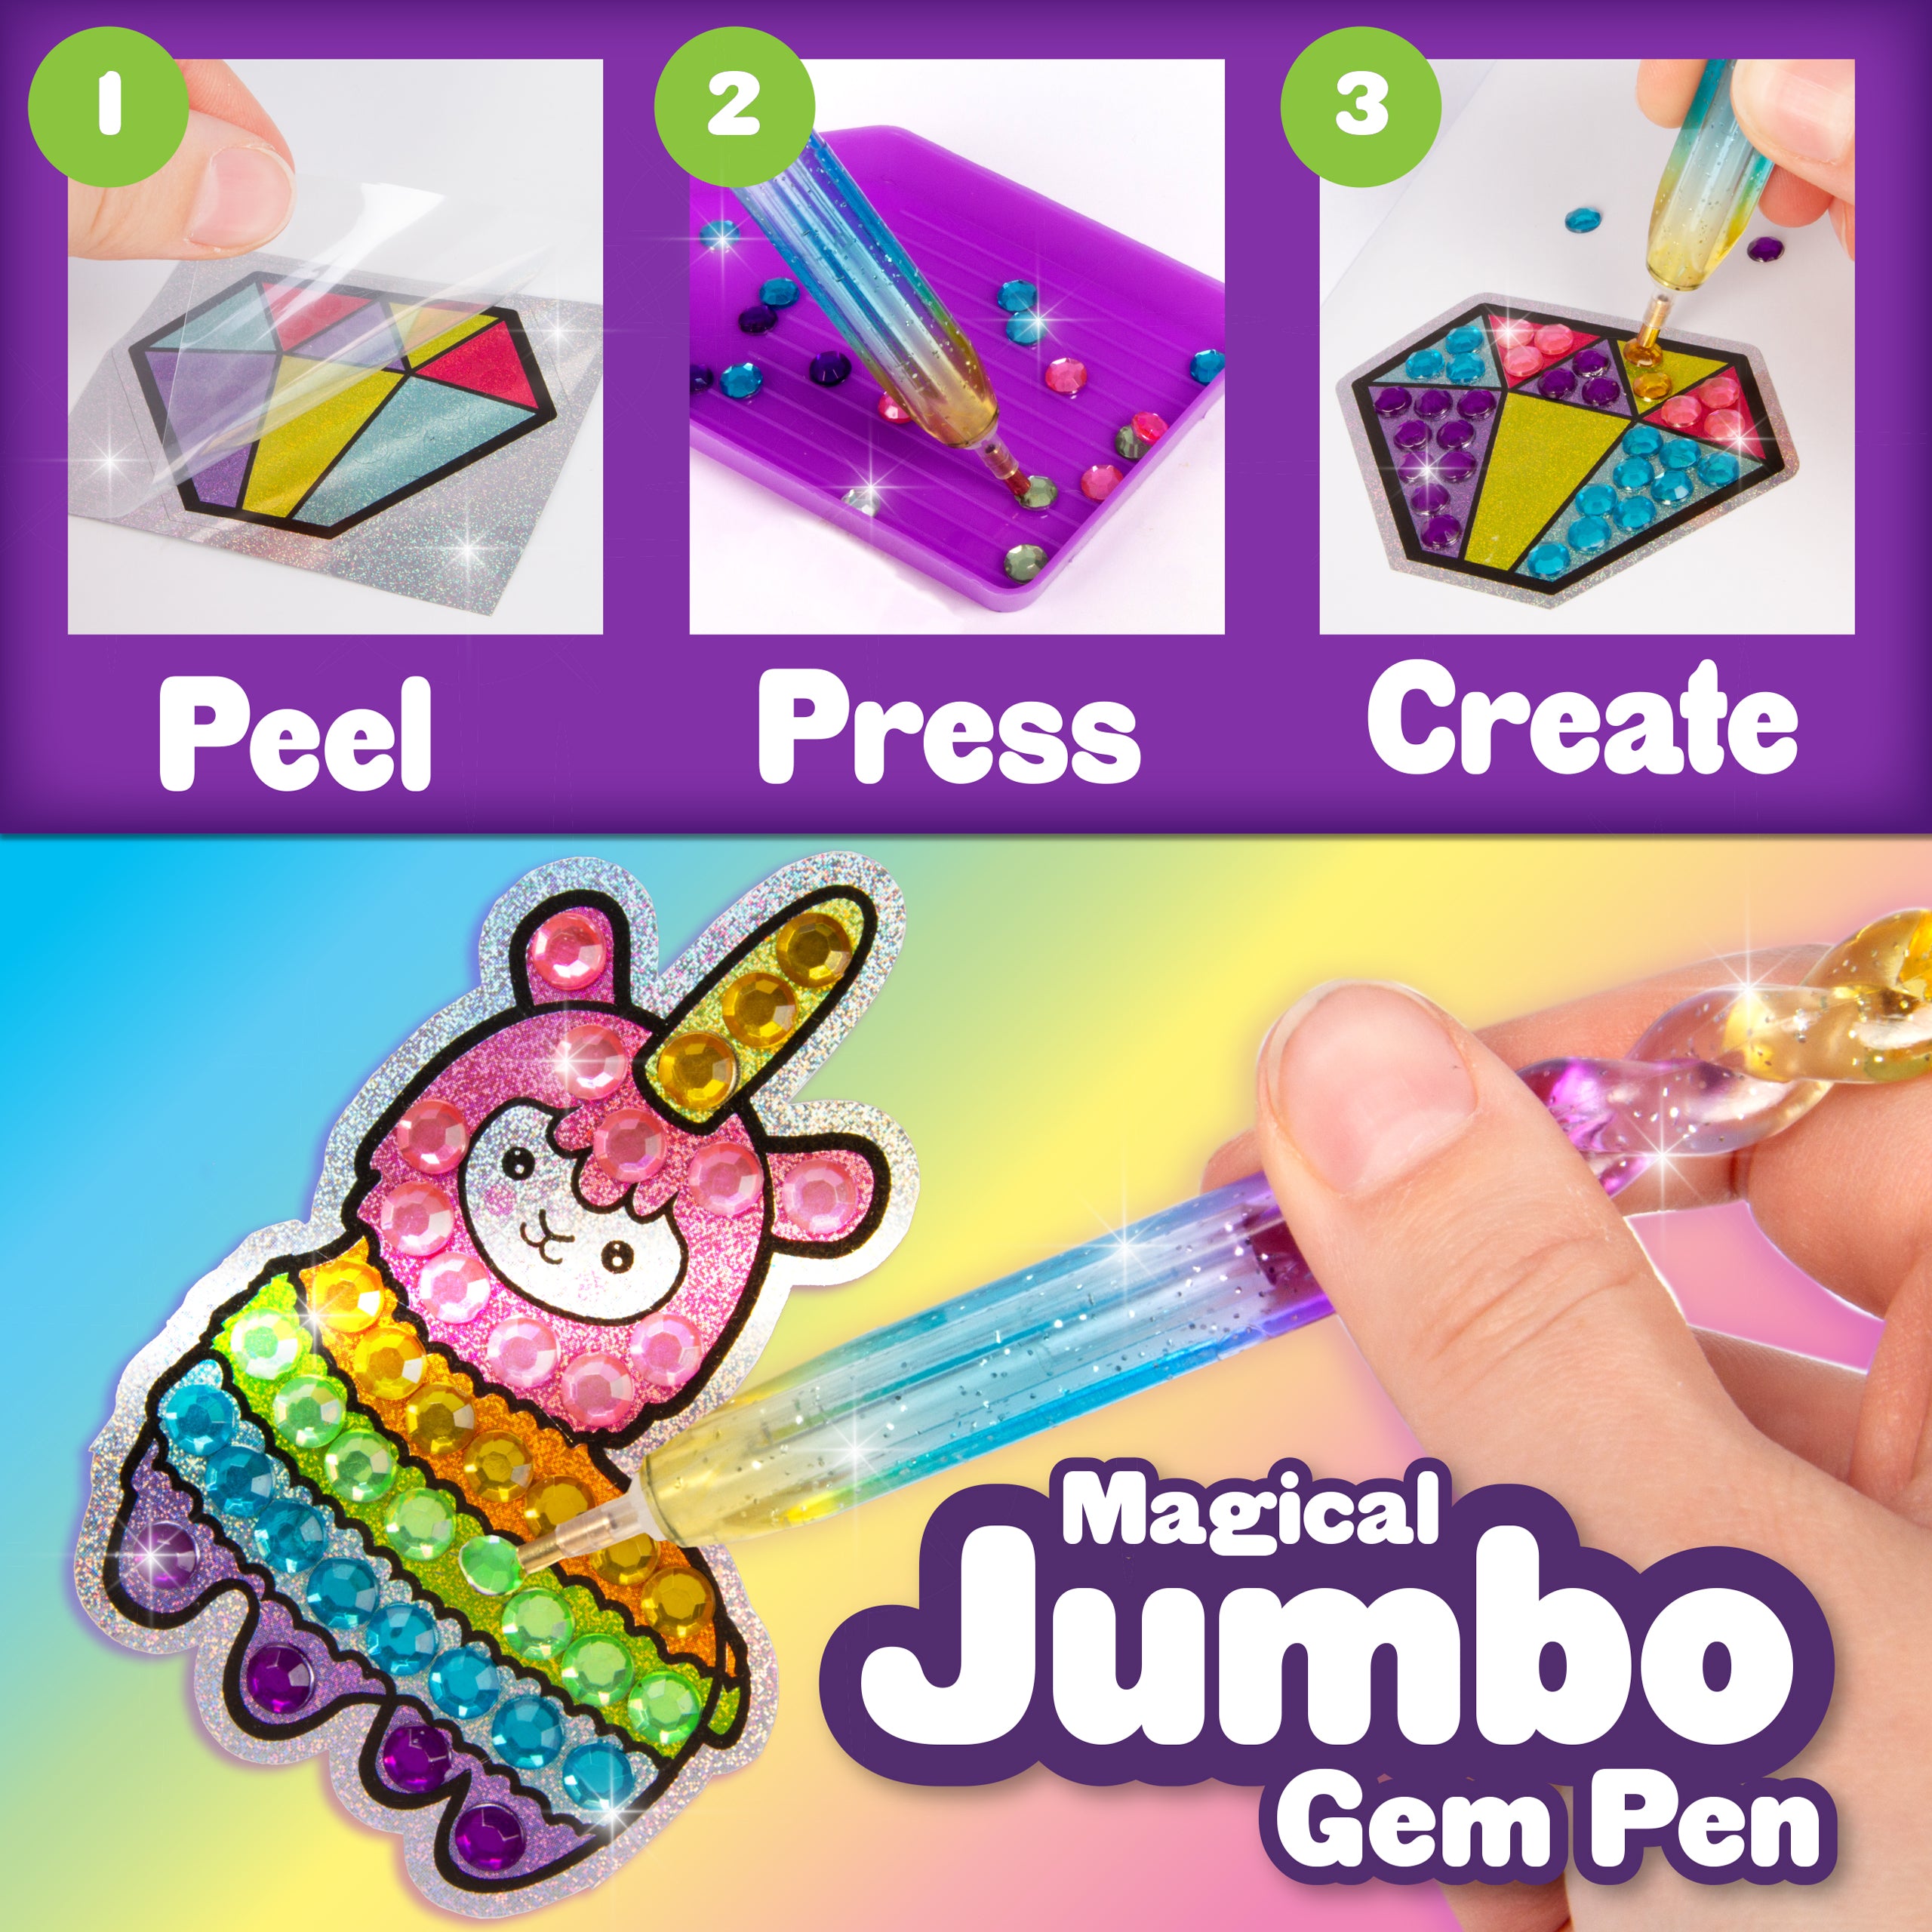 Labeol Arts and Crafts for Kids Ages 8-12 - Creat Your Own GEM